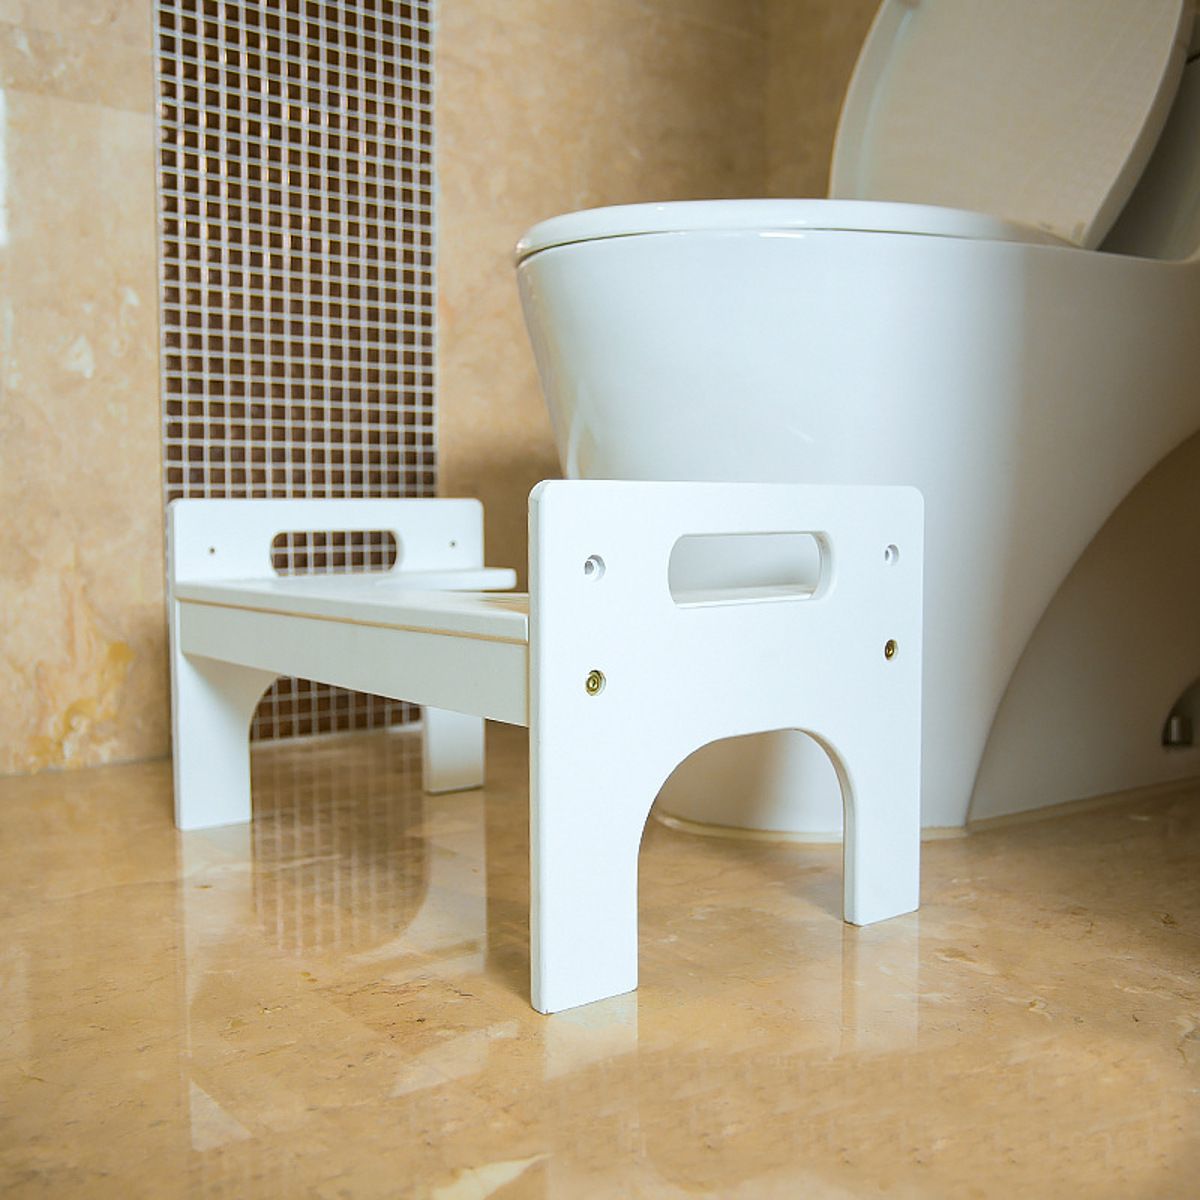 Bathroom-Anti-Constipation-For-Kids-Foldable-Plastic-Footstool-Squatting-Stool-Toilet-dropshipping-1528579